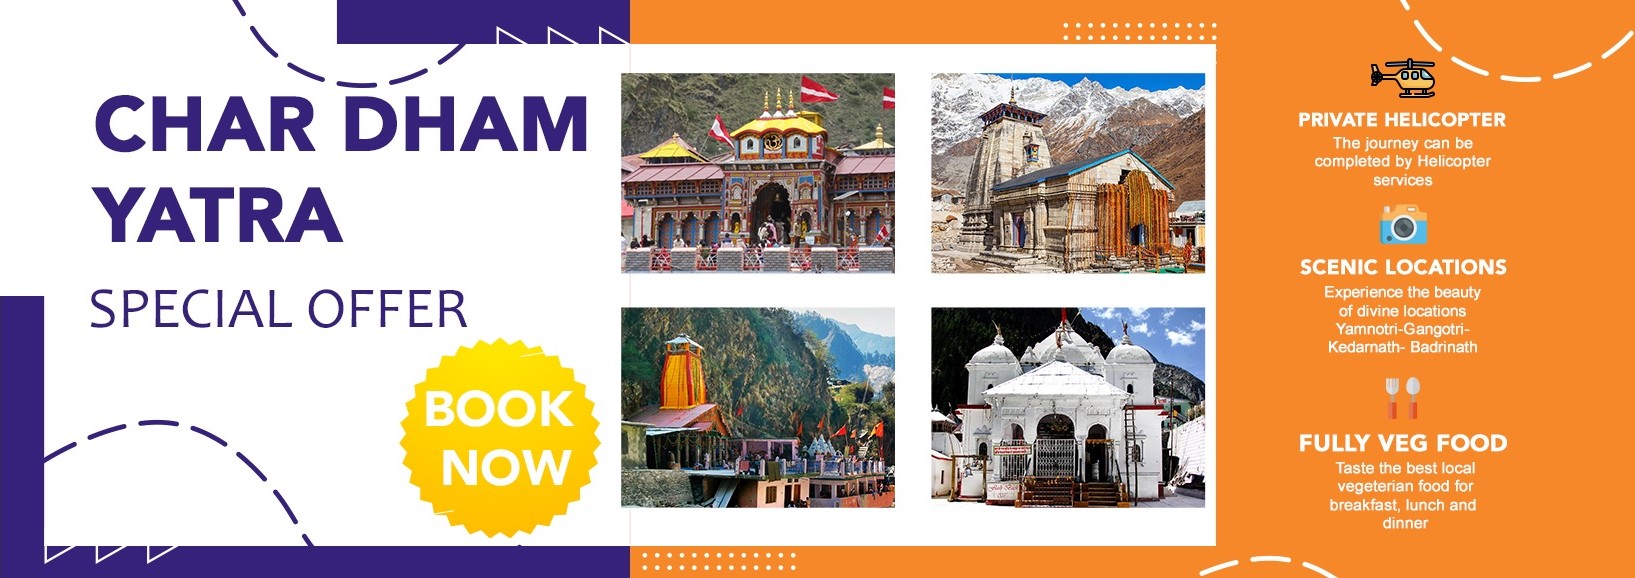 the-departures-chardham-yatra-special-offer